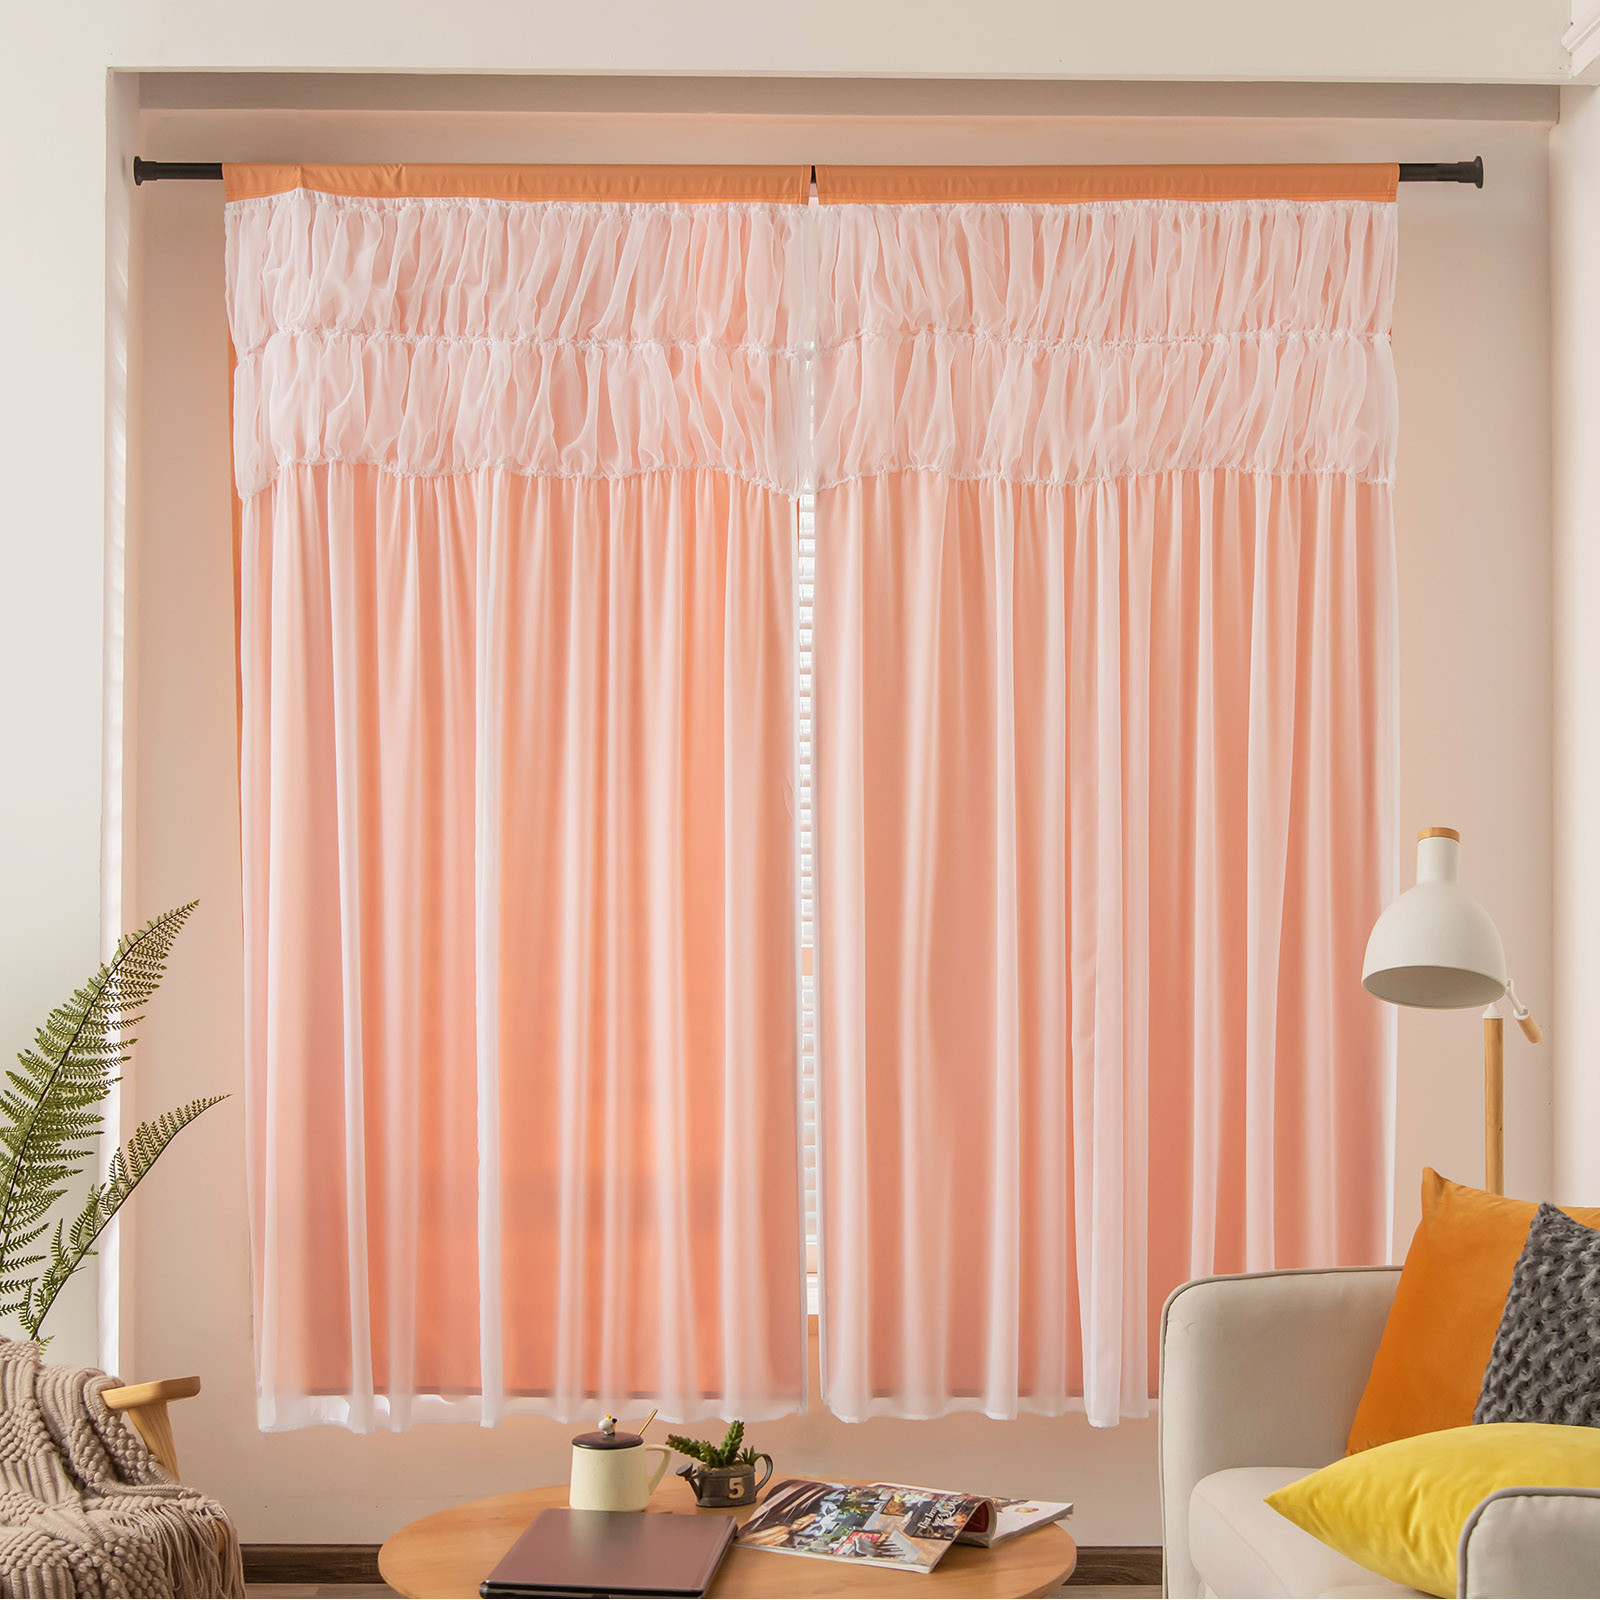 Curtain Short Length Cold Curtains 2 Panels Home Curtains Layered Solid Plain Panels And Sheer Sheer Curtains Window Curtain Panels 39"" Wide Curtains for Windows 66 to 120 Curtains Rose - image 5 of 9